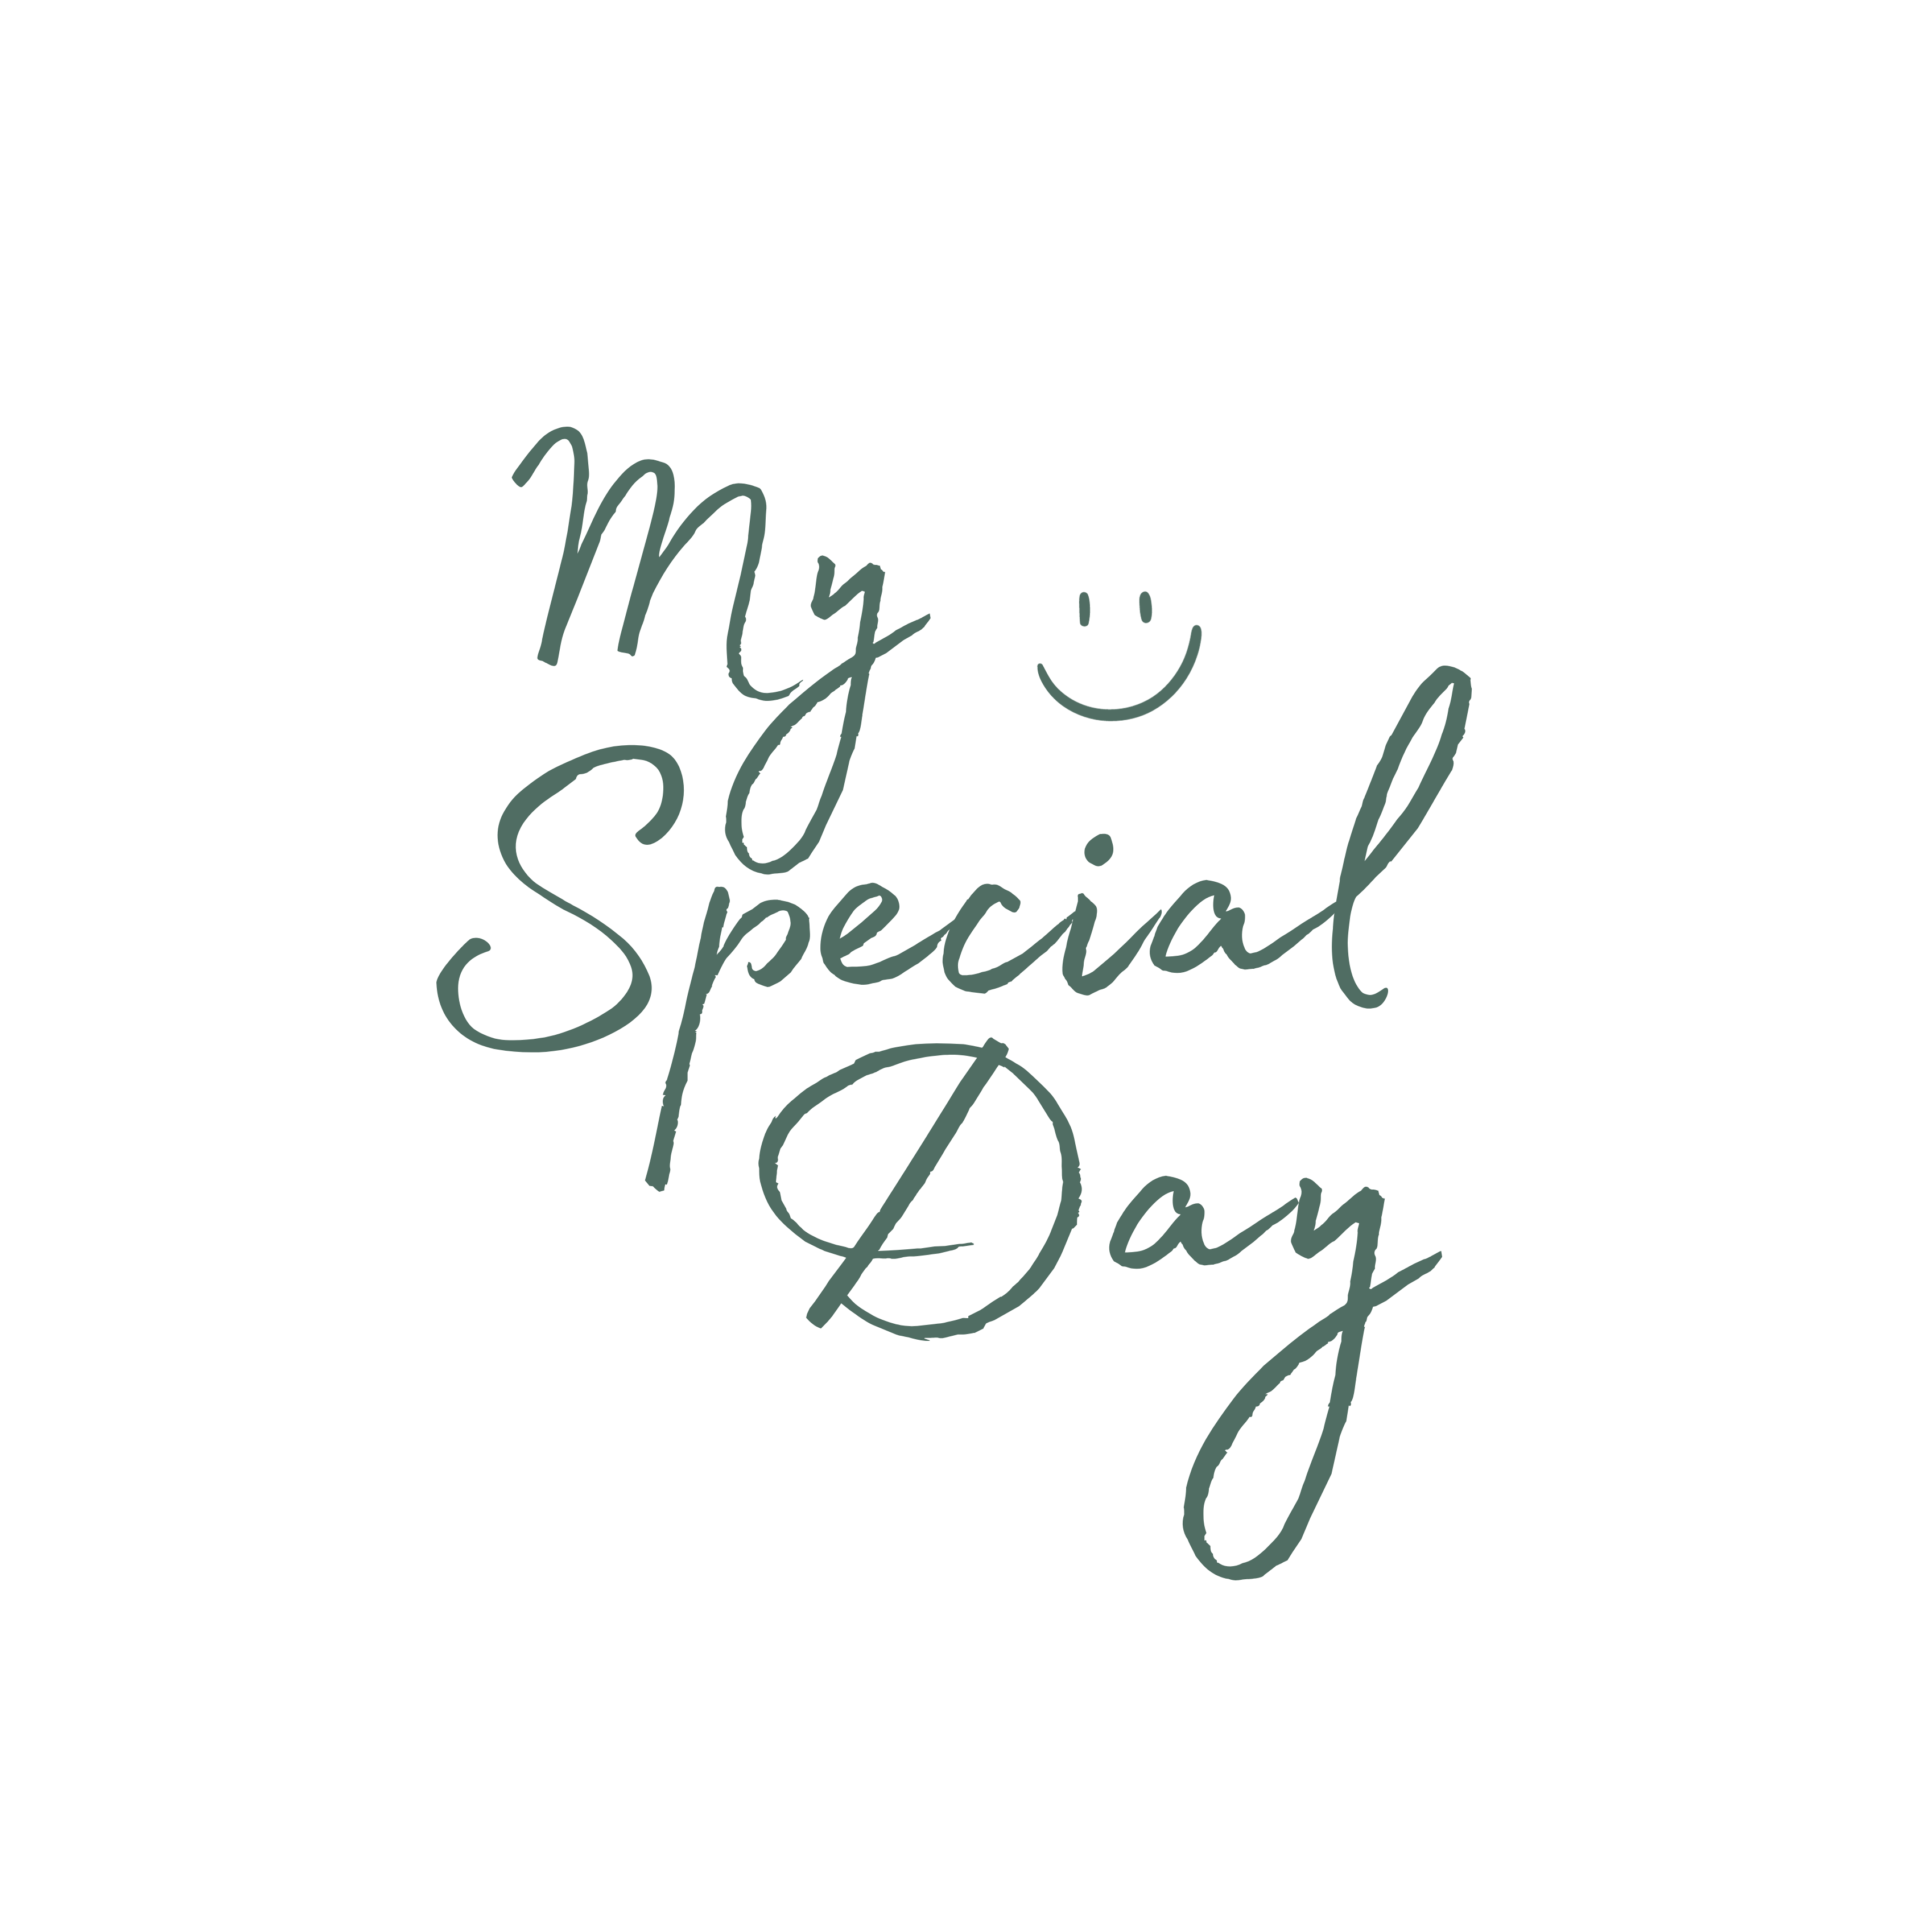 My Special Day